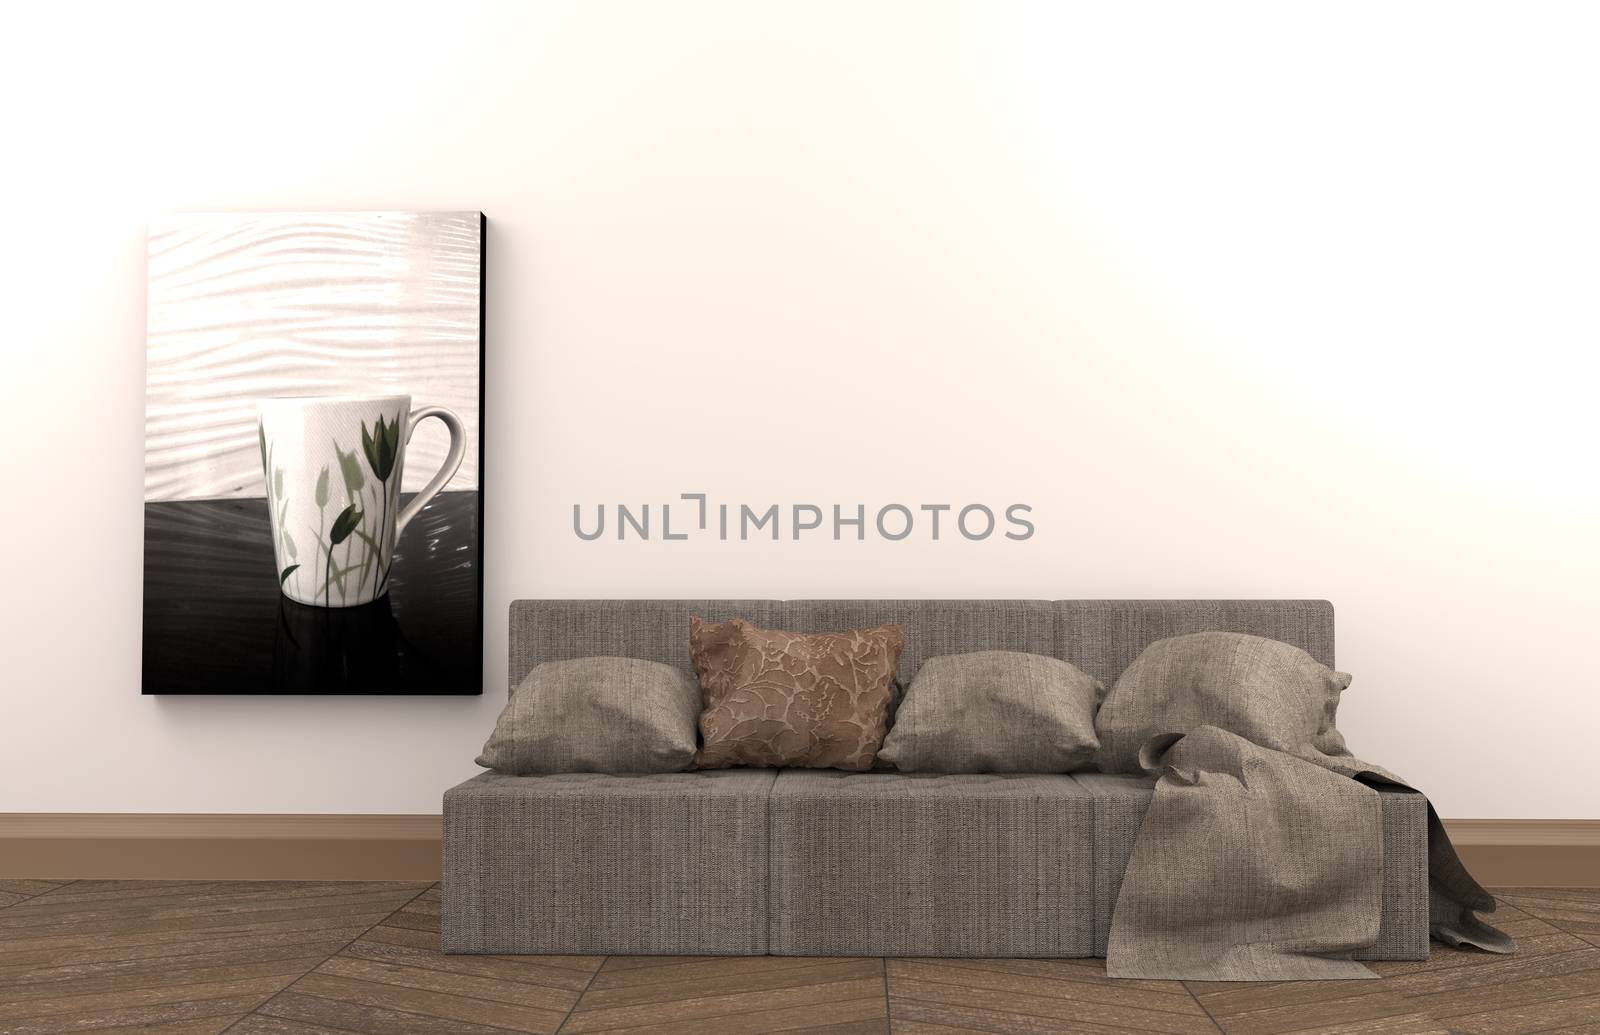 The interior has a sofa and frame on empty white wall background,3D rendering